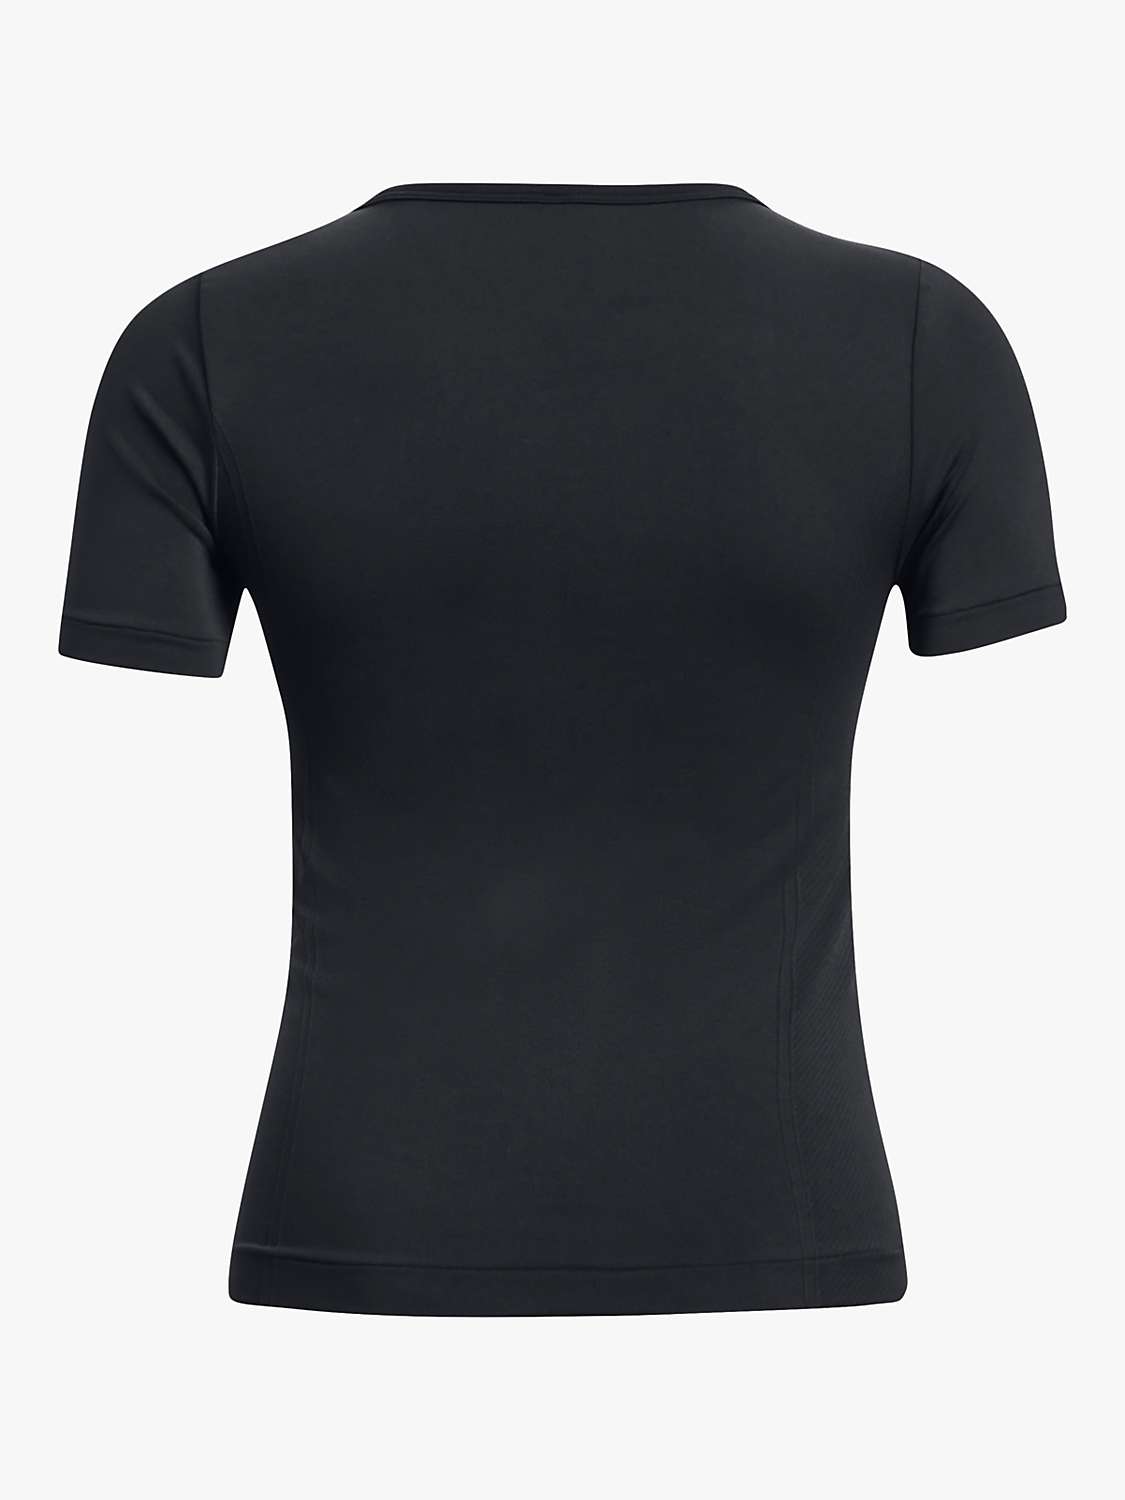 Buy Under Armour Train Seamless Short Sleeve Gym Top Online at johnlewis.com